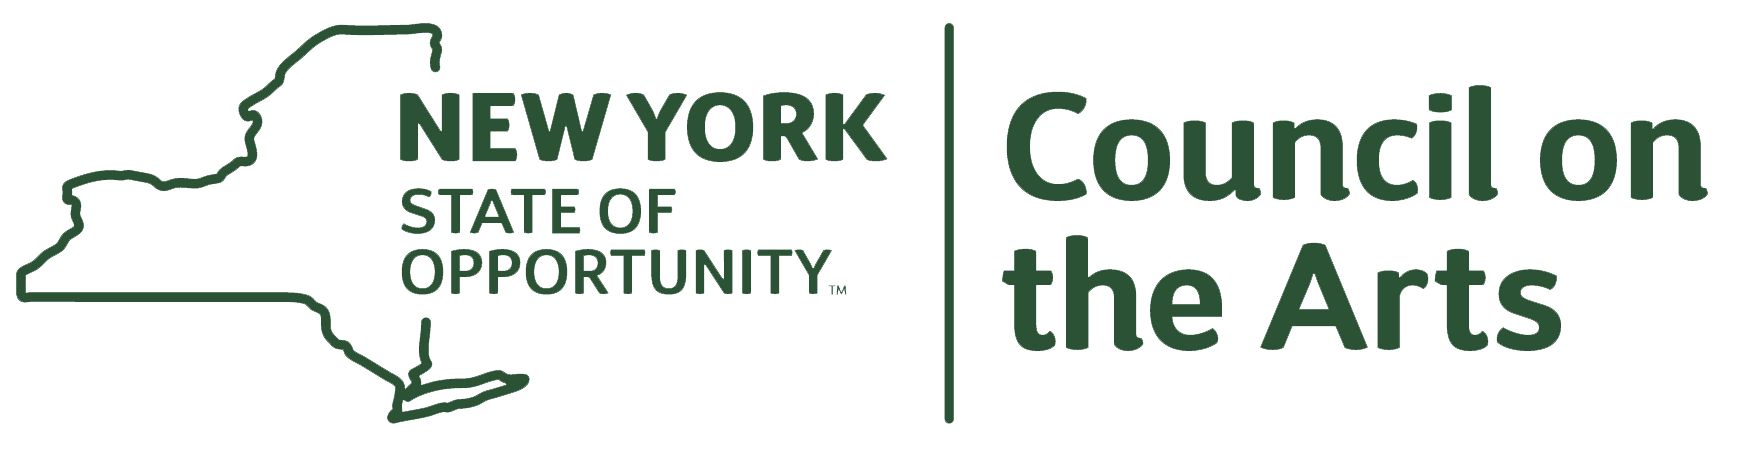 New York State of Opportunity and Council on the Arts Logo